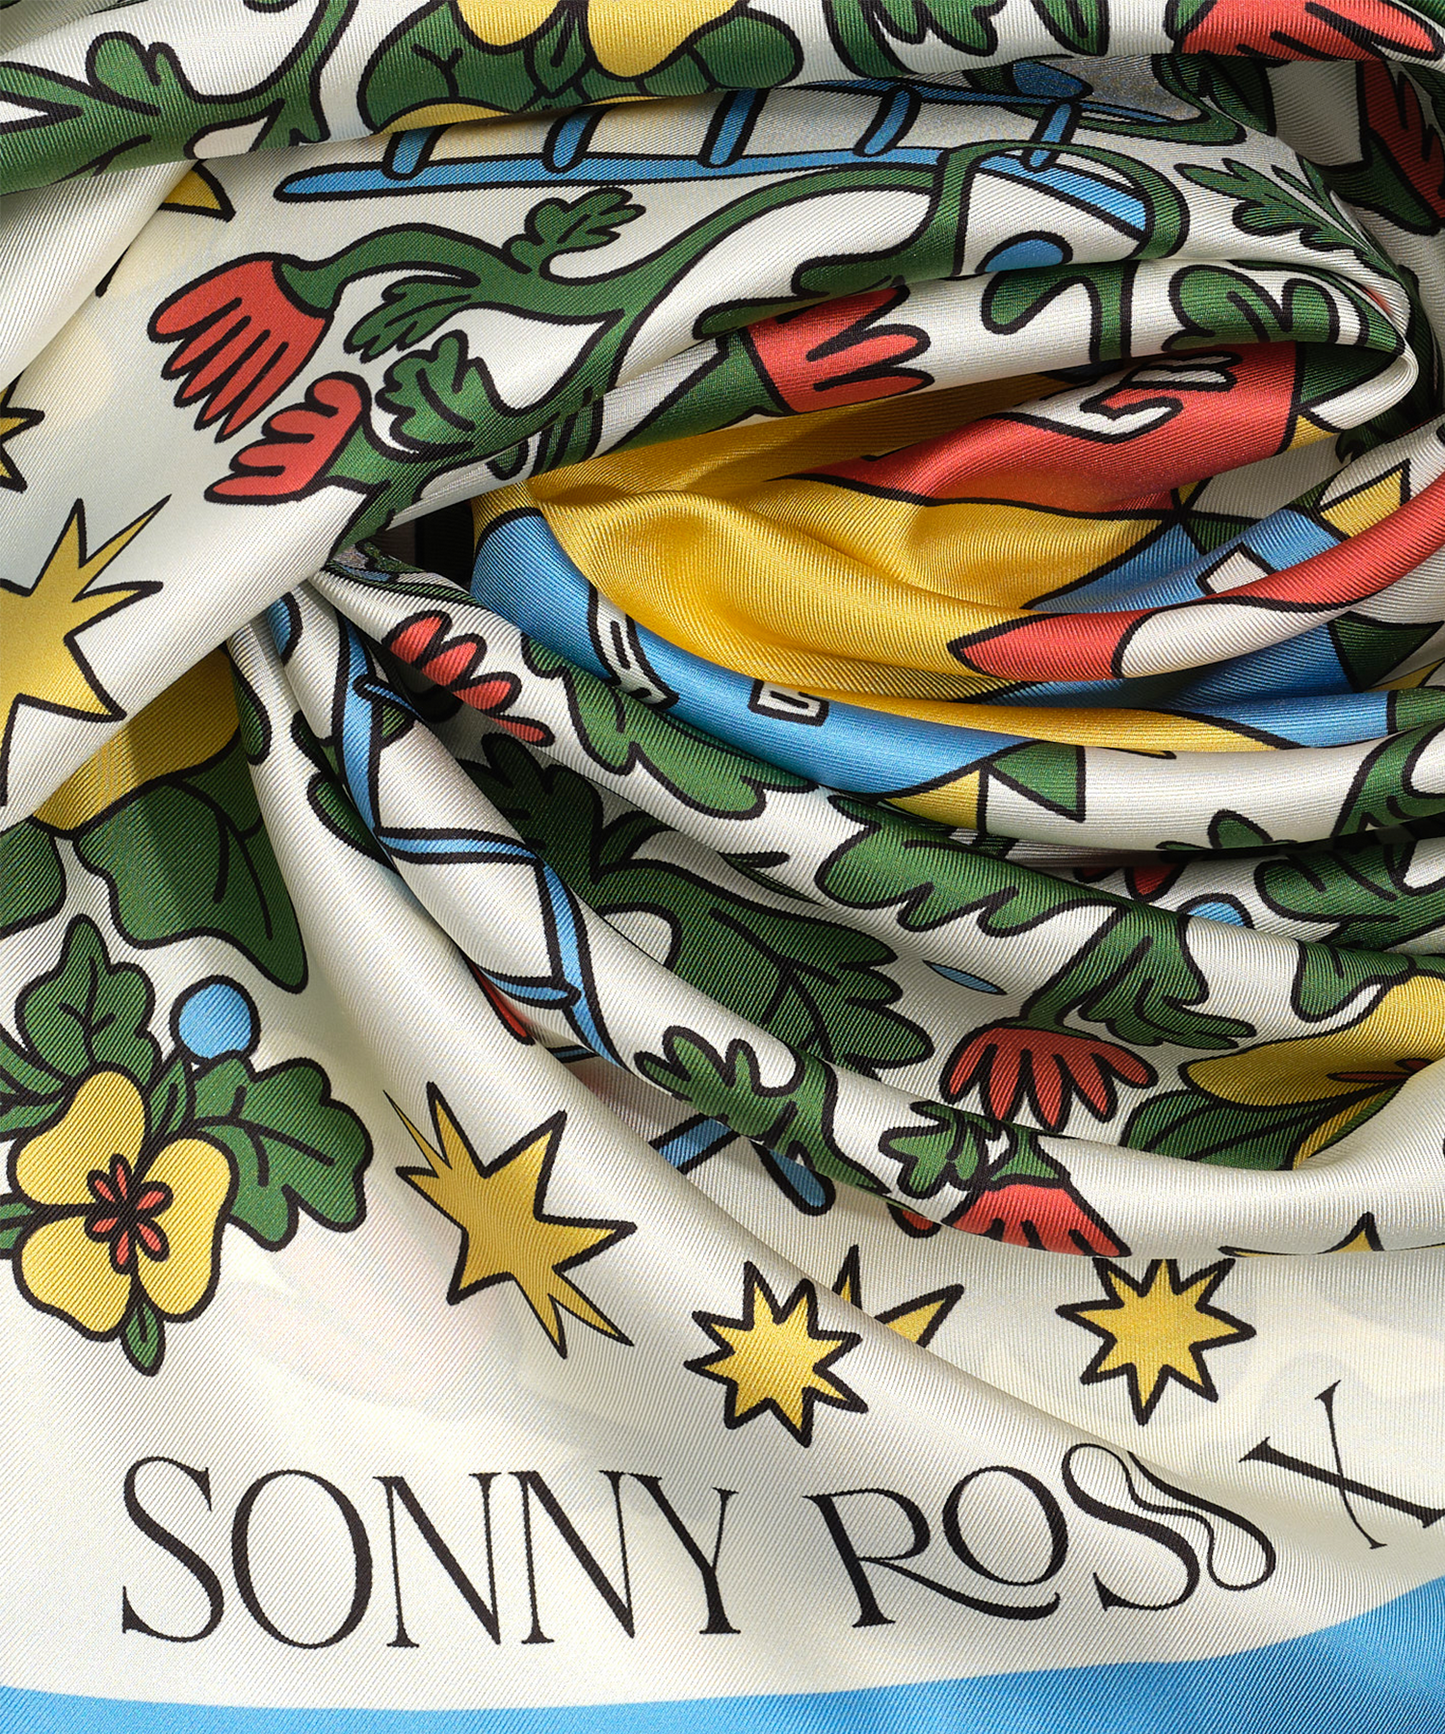 A close-up image of the Echo100 scarf by Sonny Ross